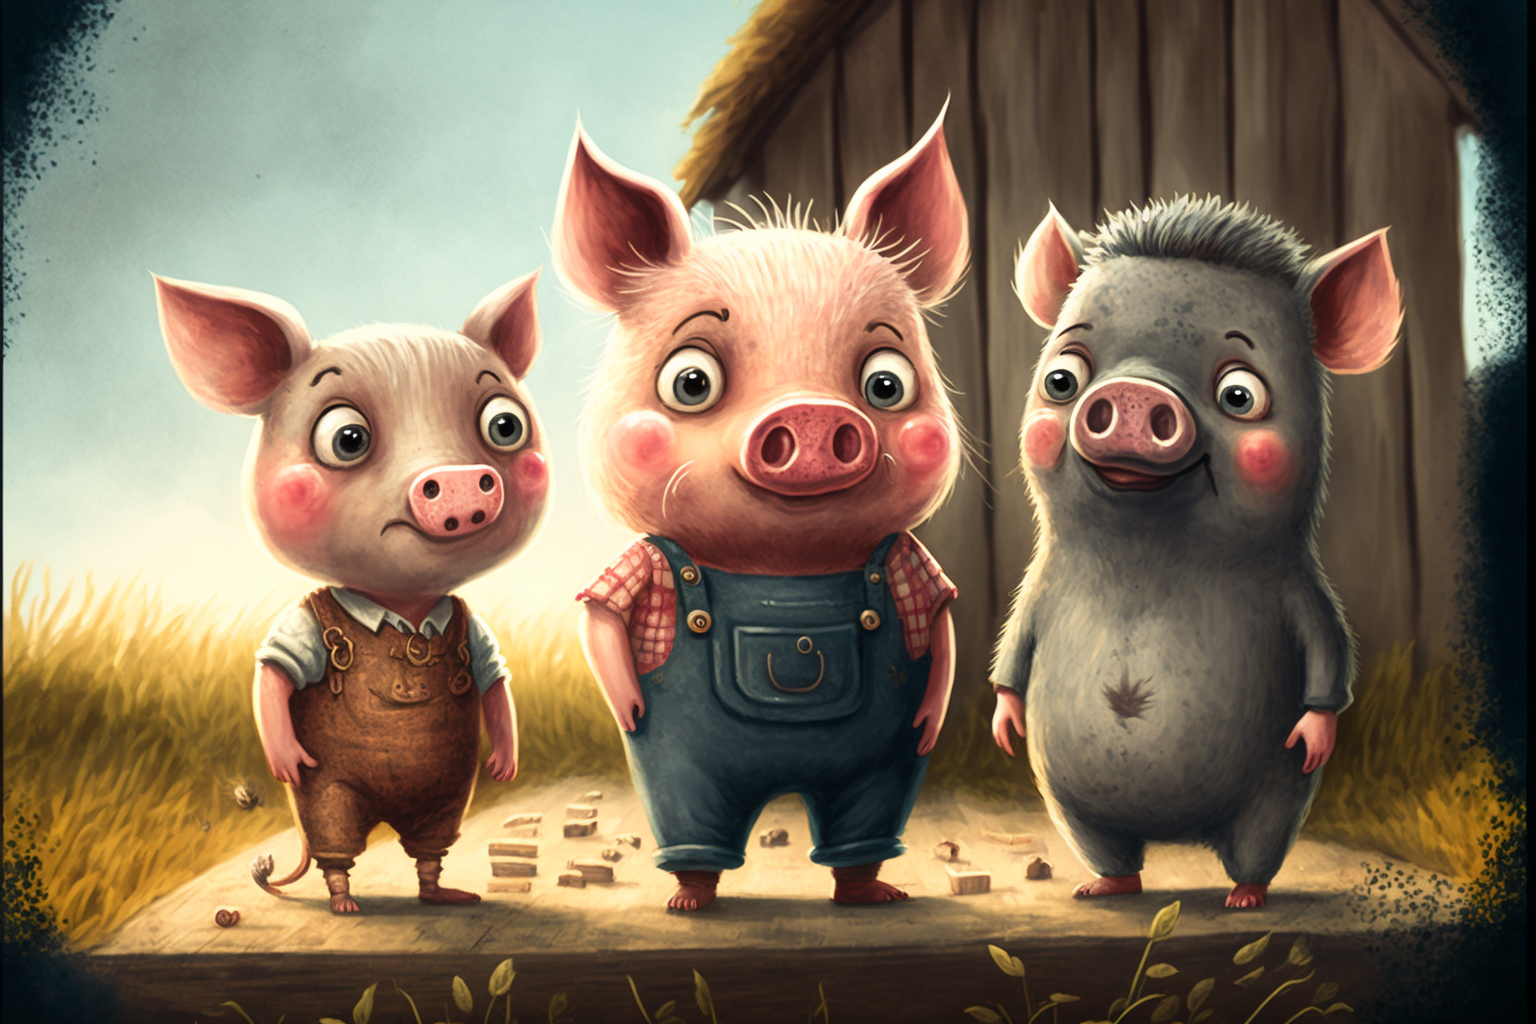 The Three Little Pigs and The Wolf